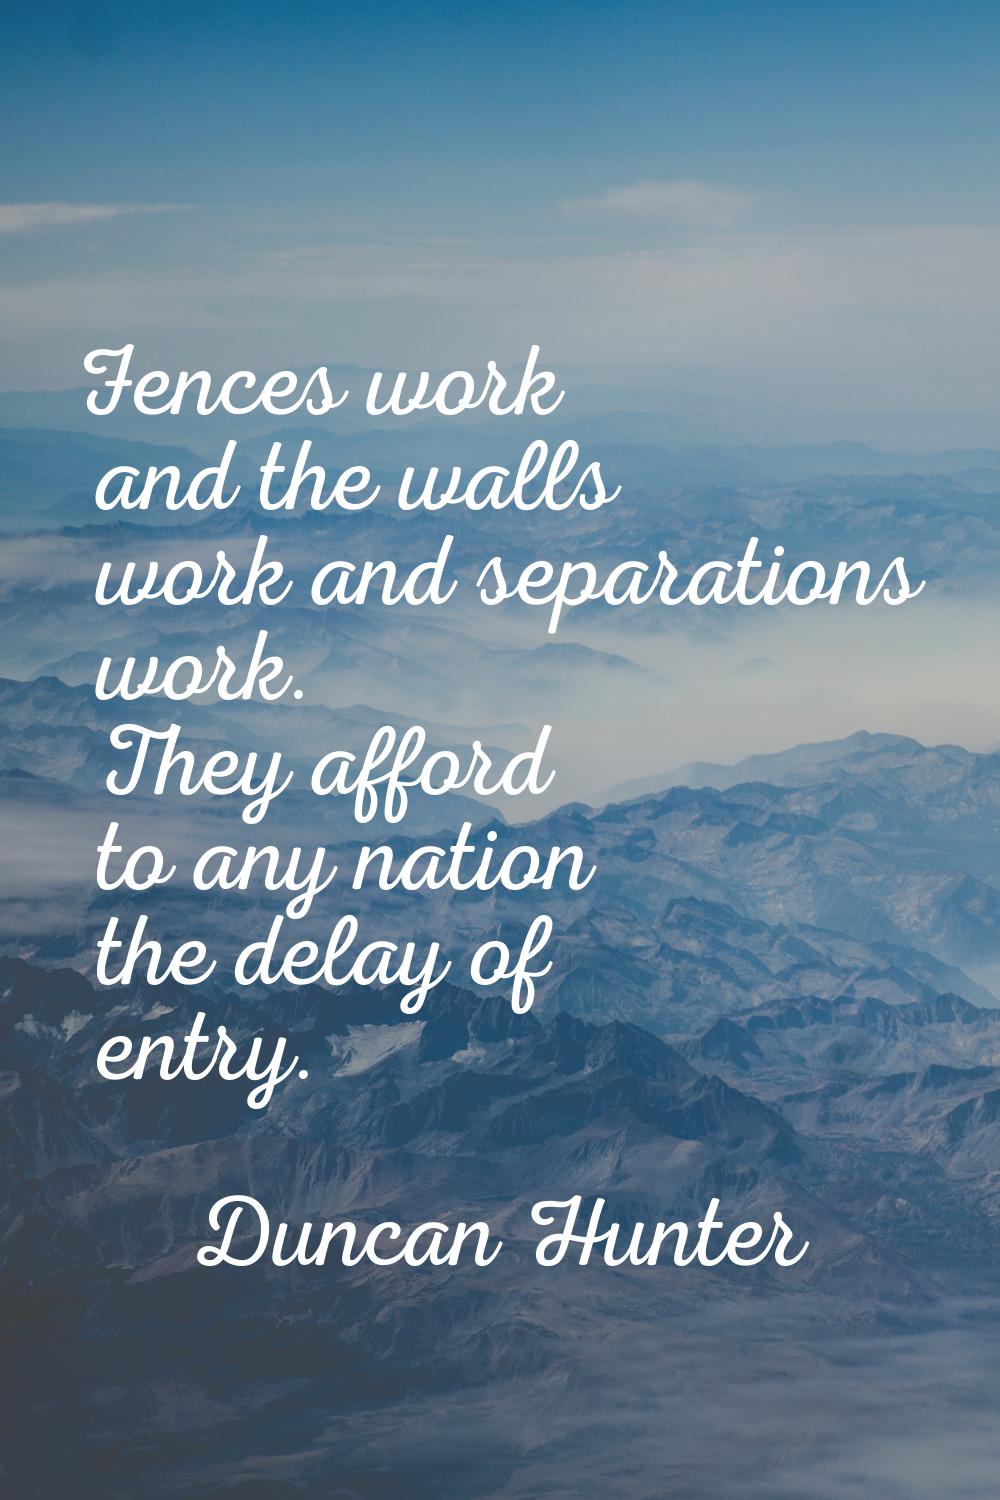 Fences work and the walls work and separations work. They afford to any nation the delay of entry.